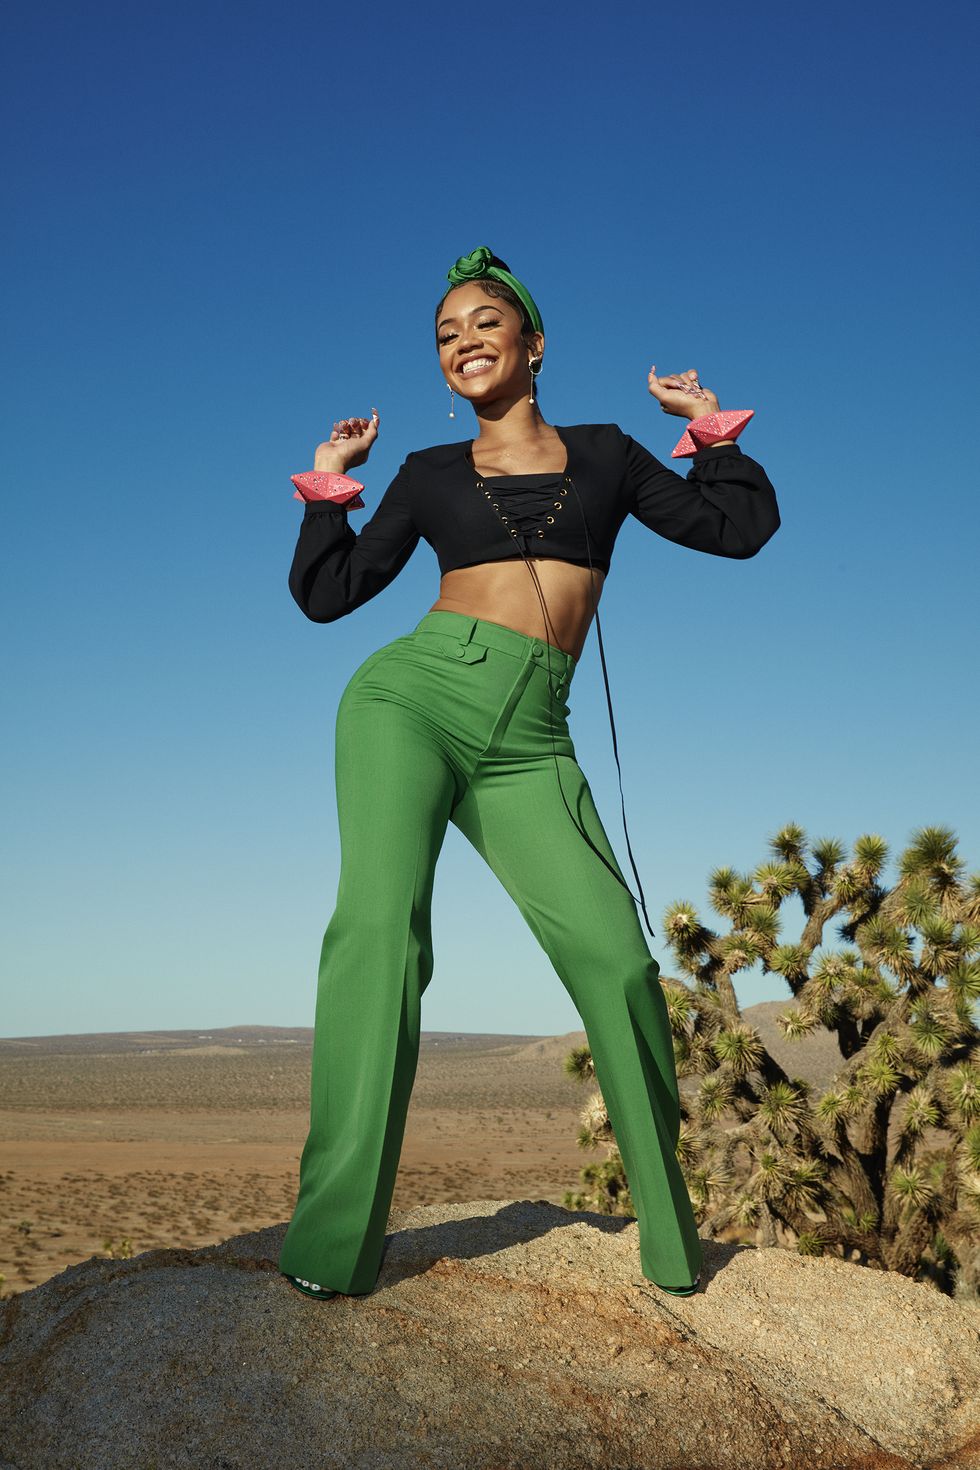 singer saweetie smiling and standing up with hands up in the air near each of her shoulders, wearing a black top, green pants, green headwear, and green heels, in front of a desert and sky background